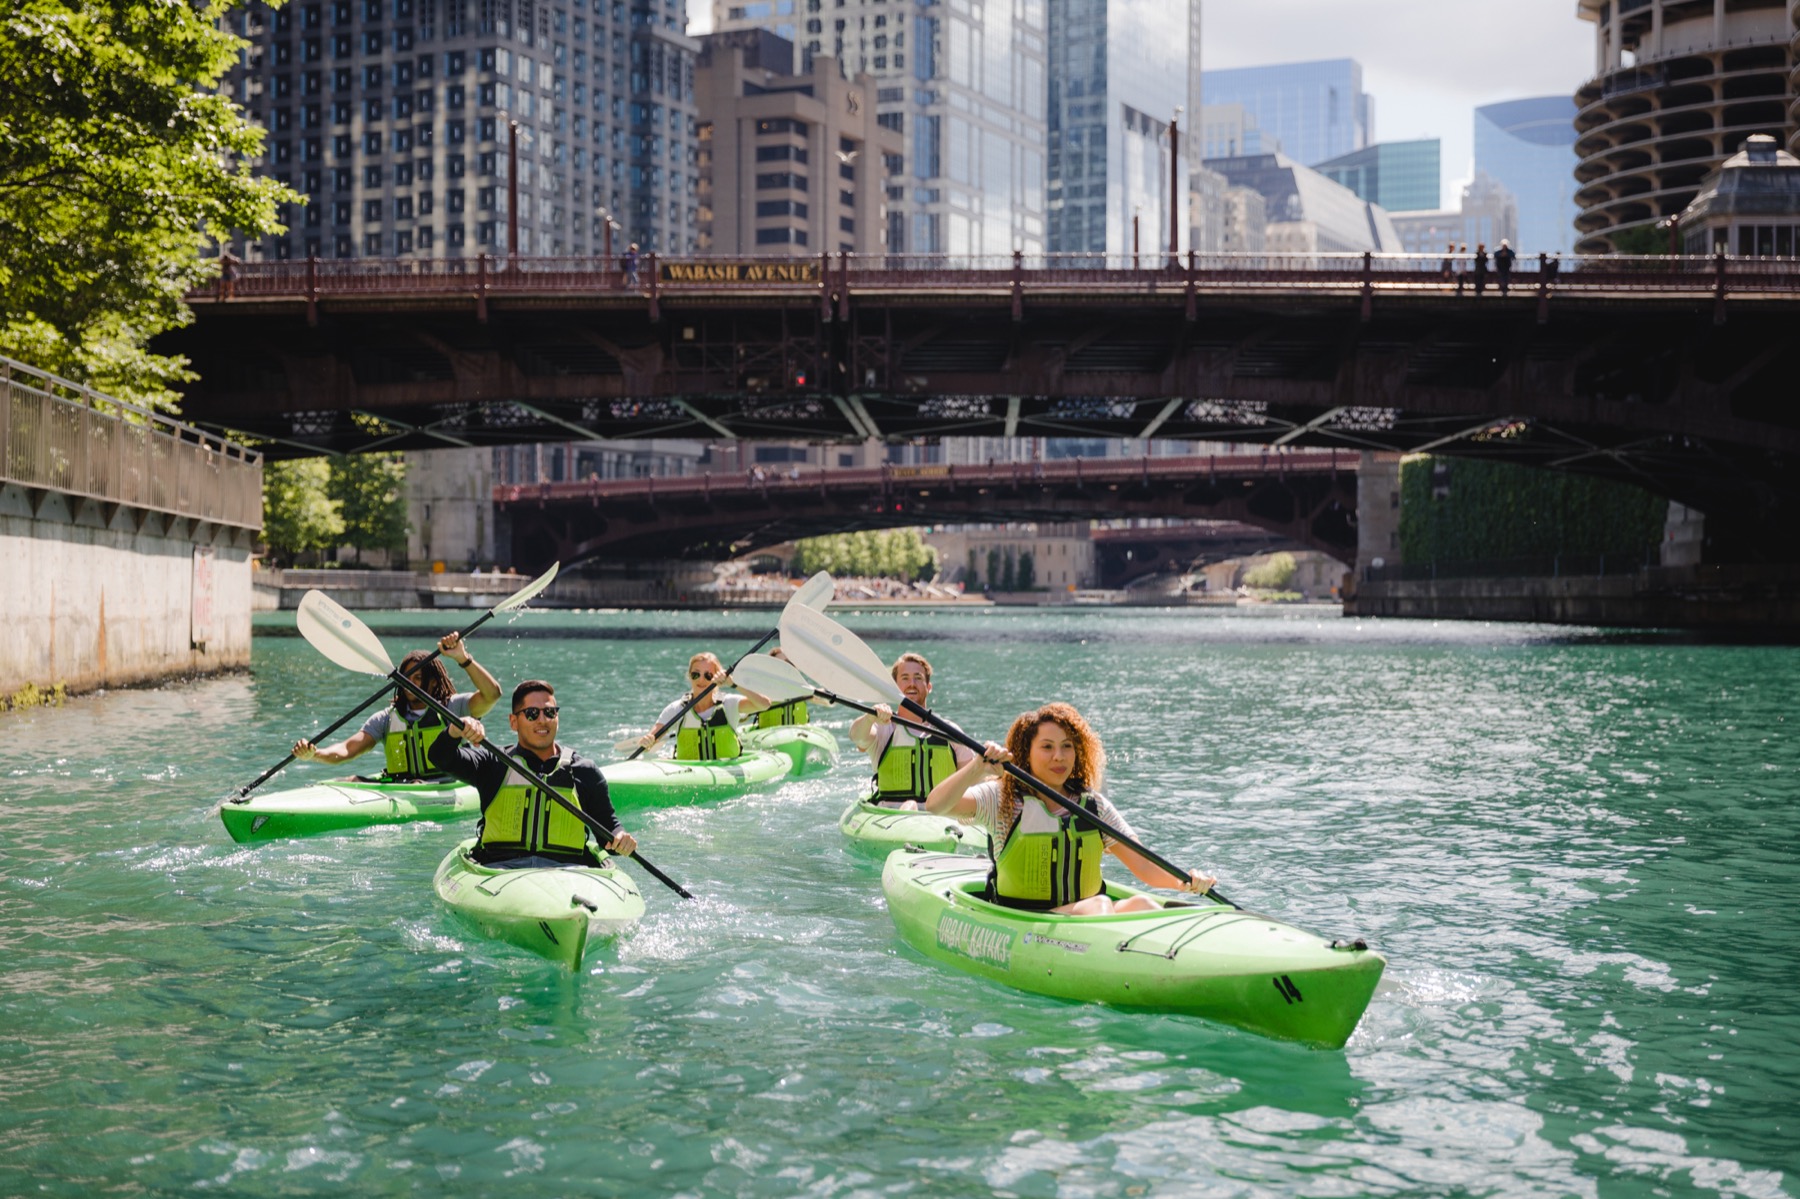 Kayaking on the Chicago River